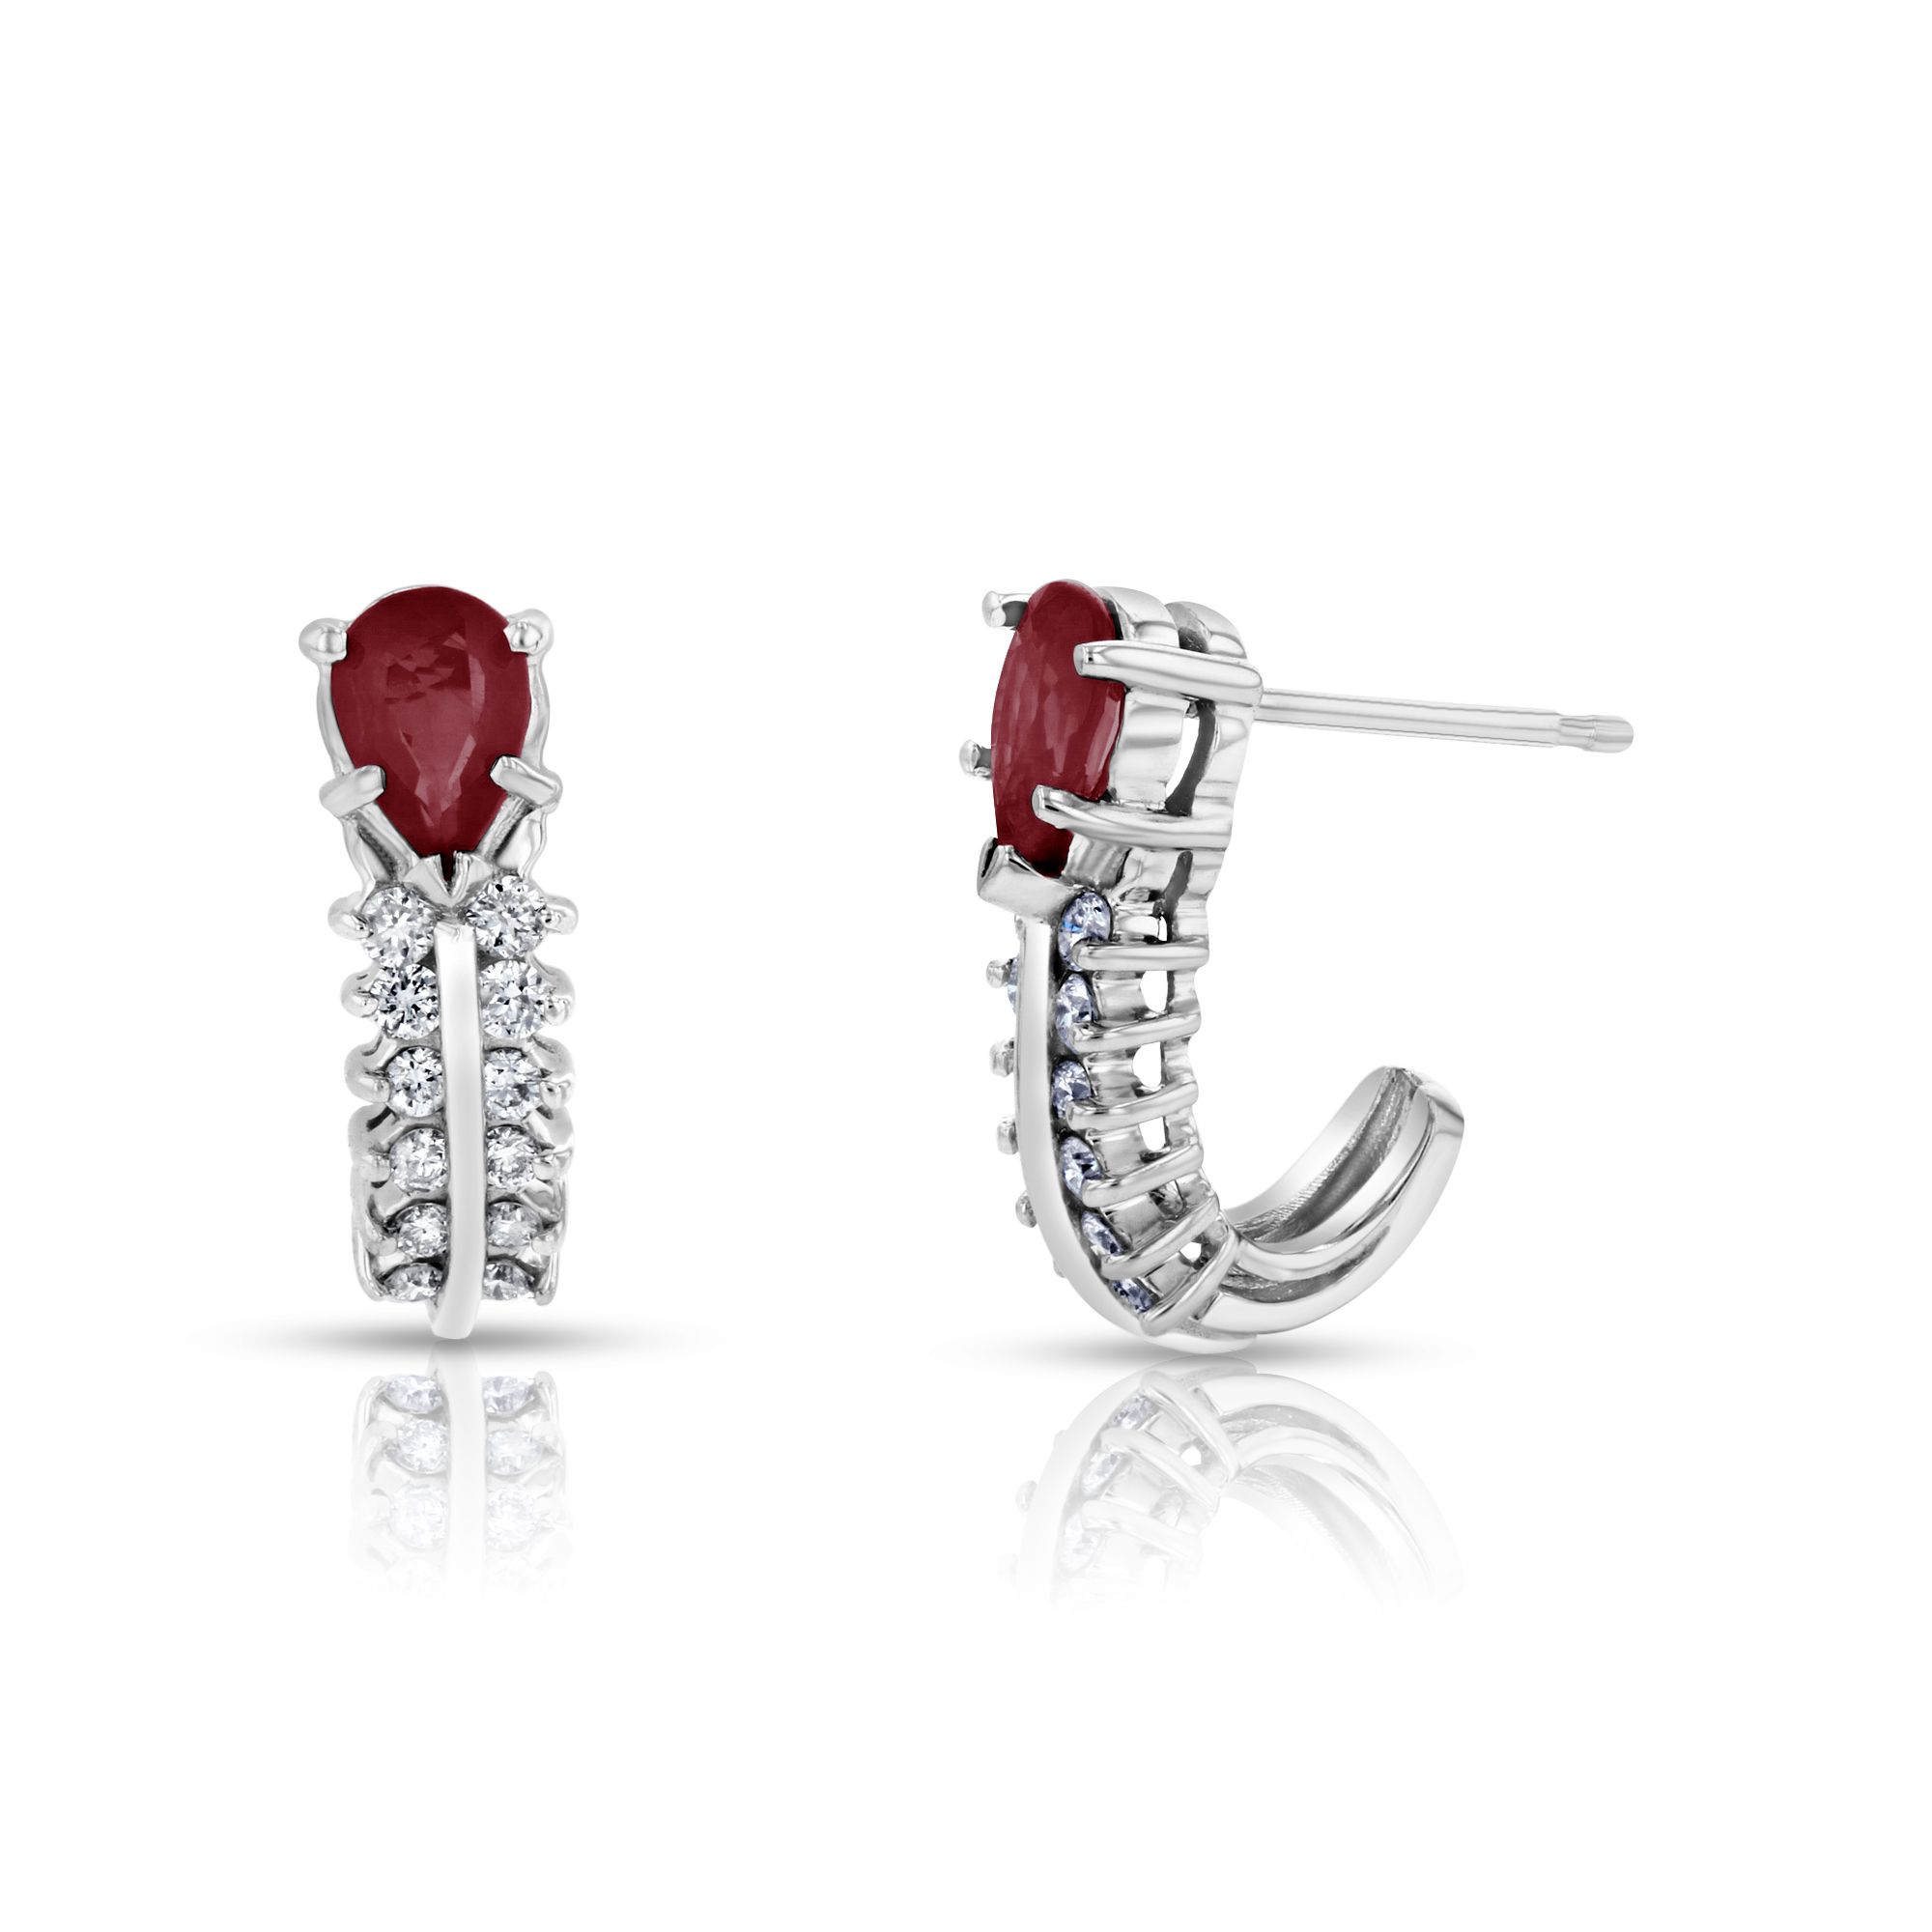 View 0.30ctw Diamonds and Ruby Earrings in 14k White Gold